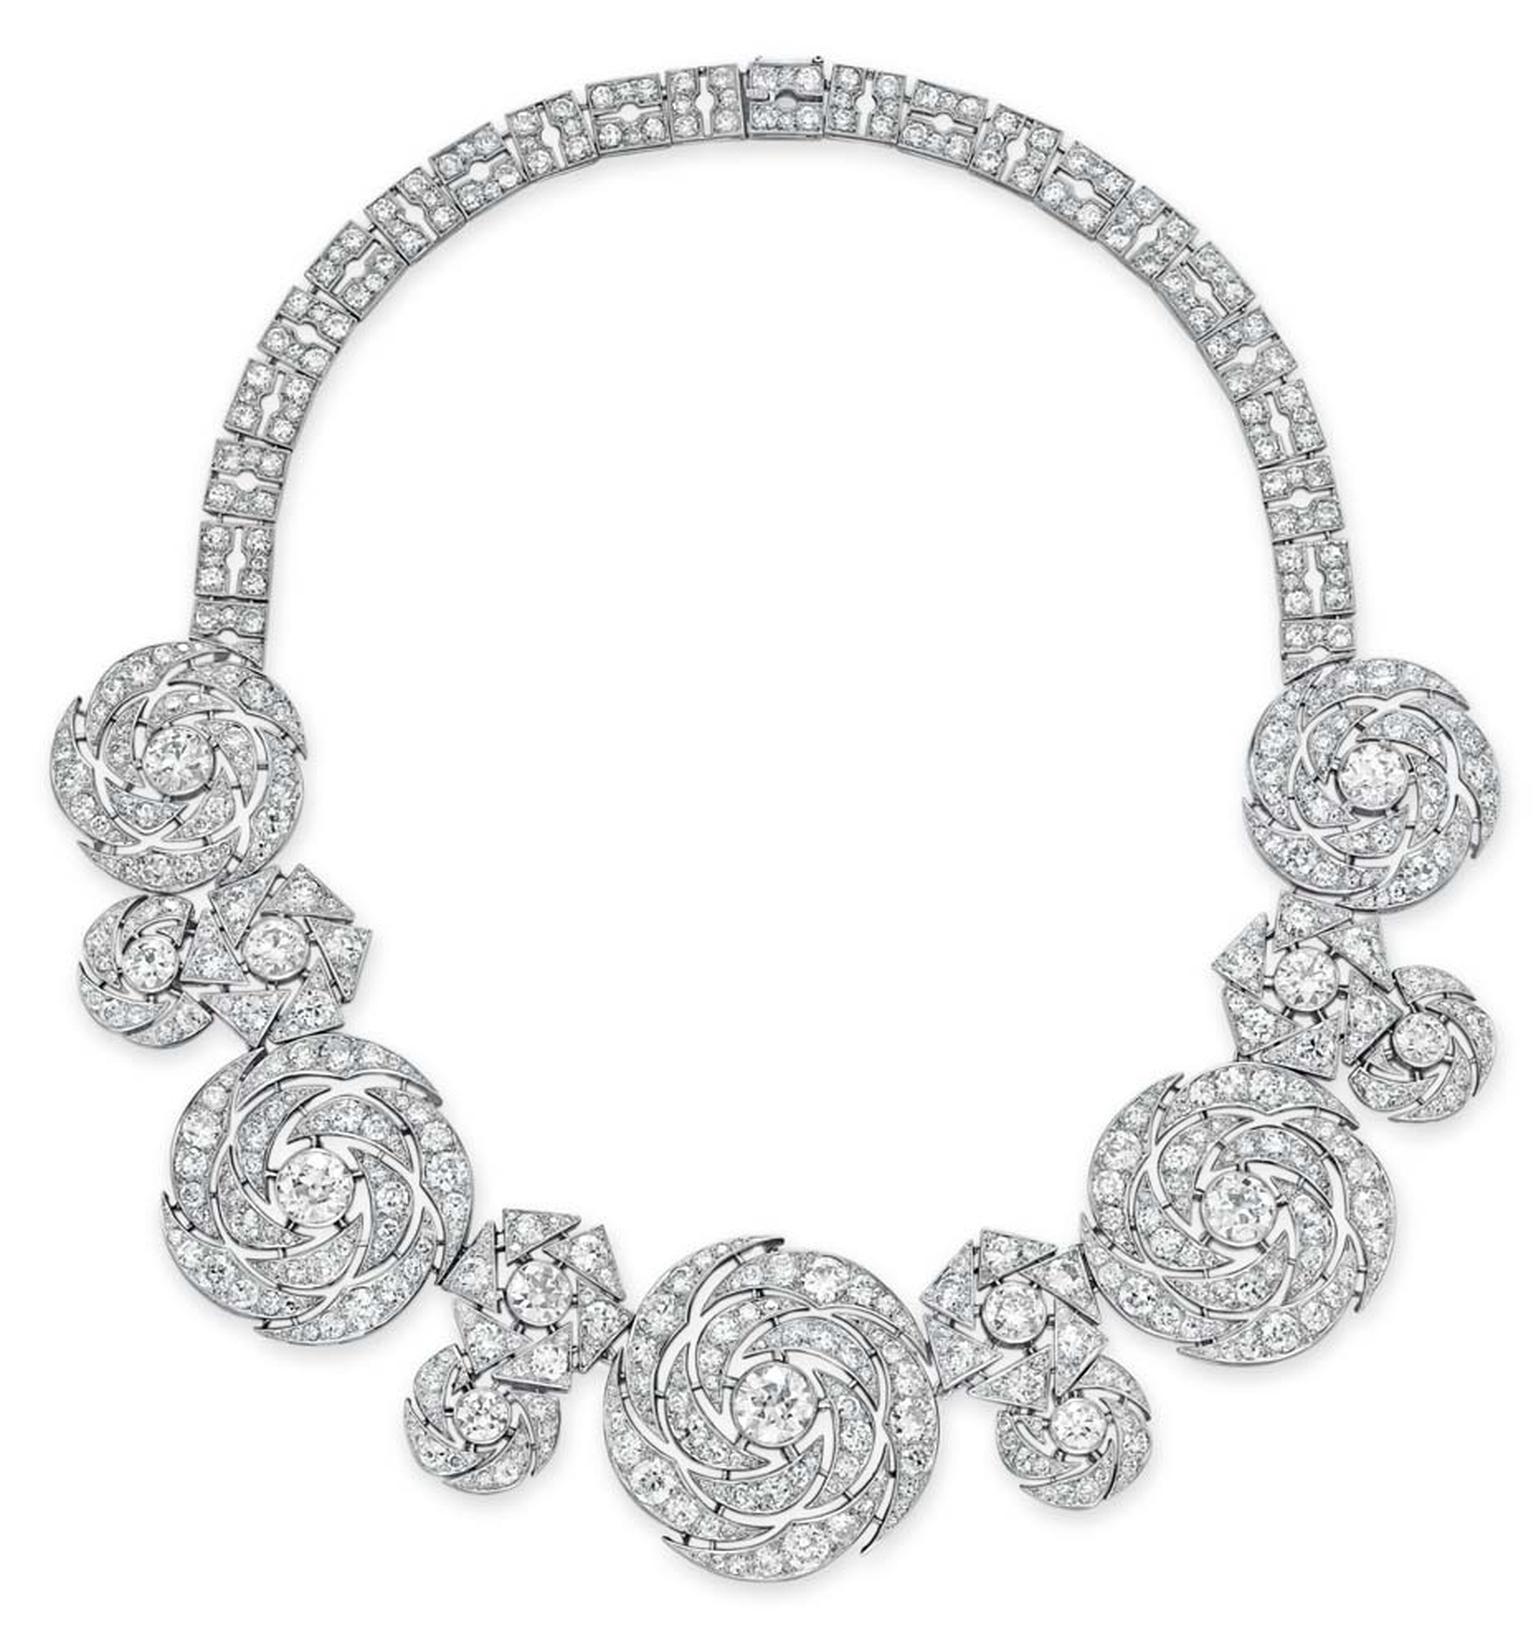 Lot 230, a diamond necklace by Cartier, designed a a series of graduated openwork old European and single-cut diamond swirling plaques in platinum, circa 1942 (estimate: US$450-650,000)